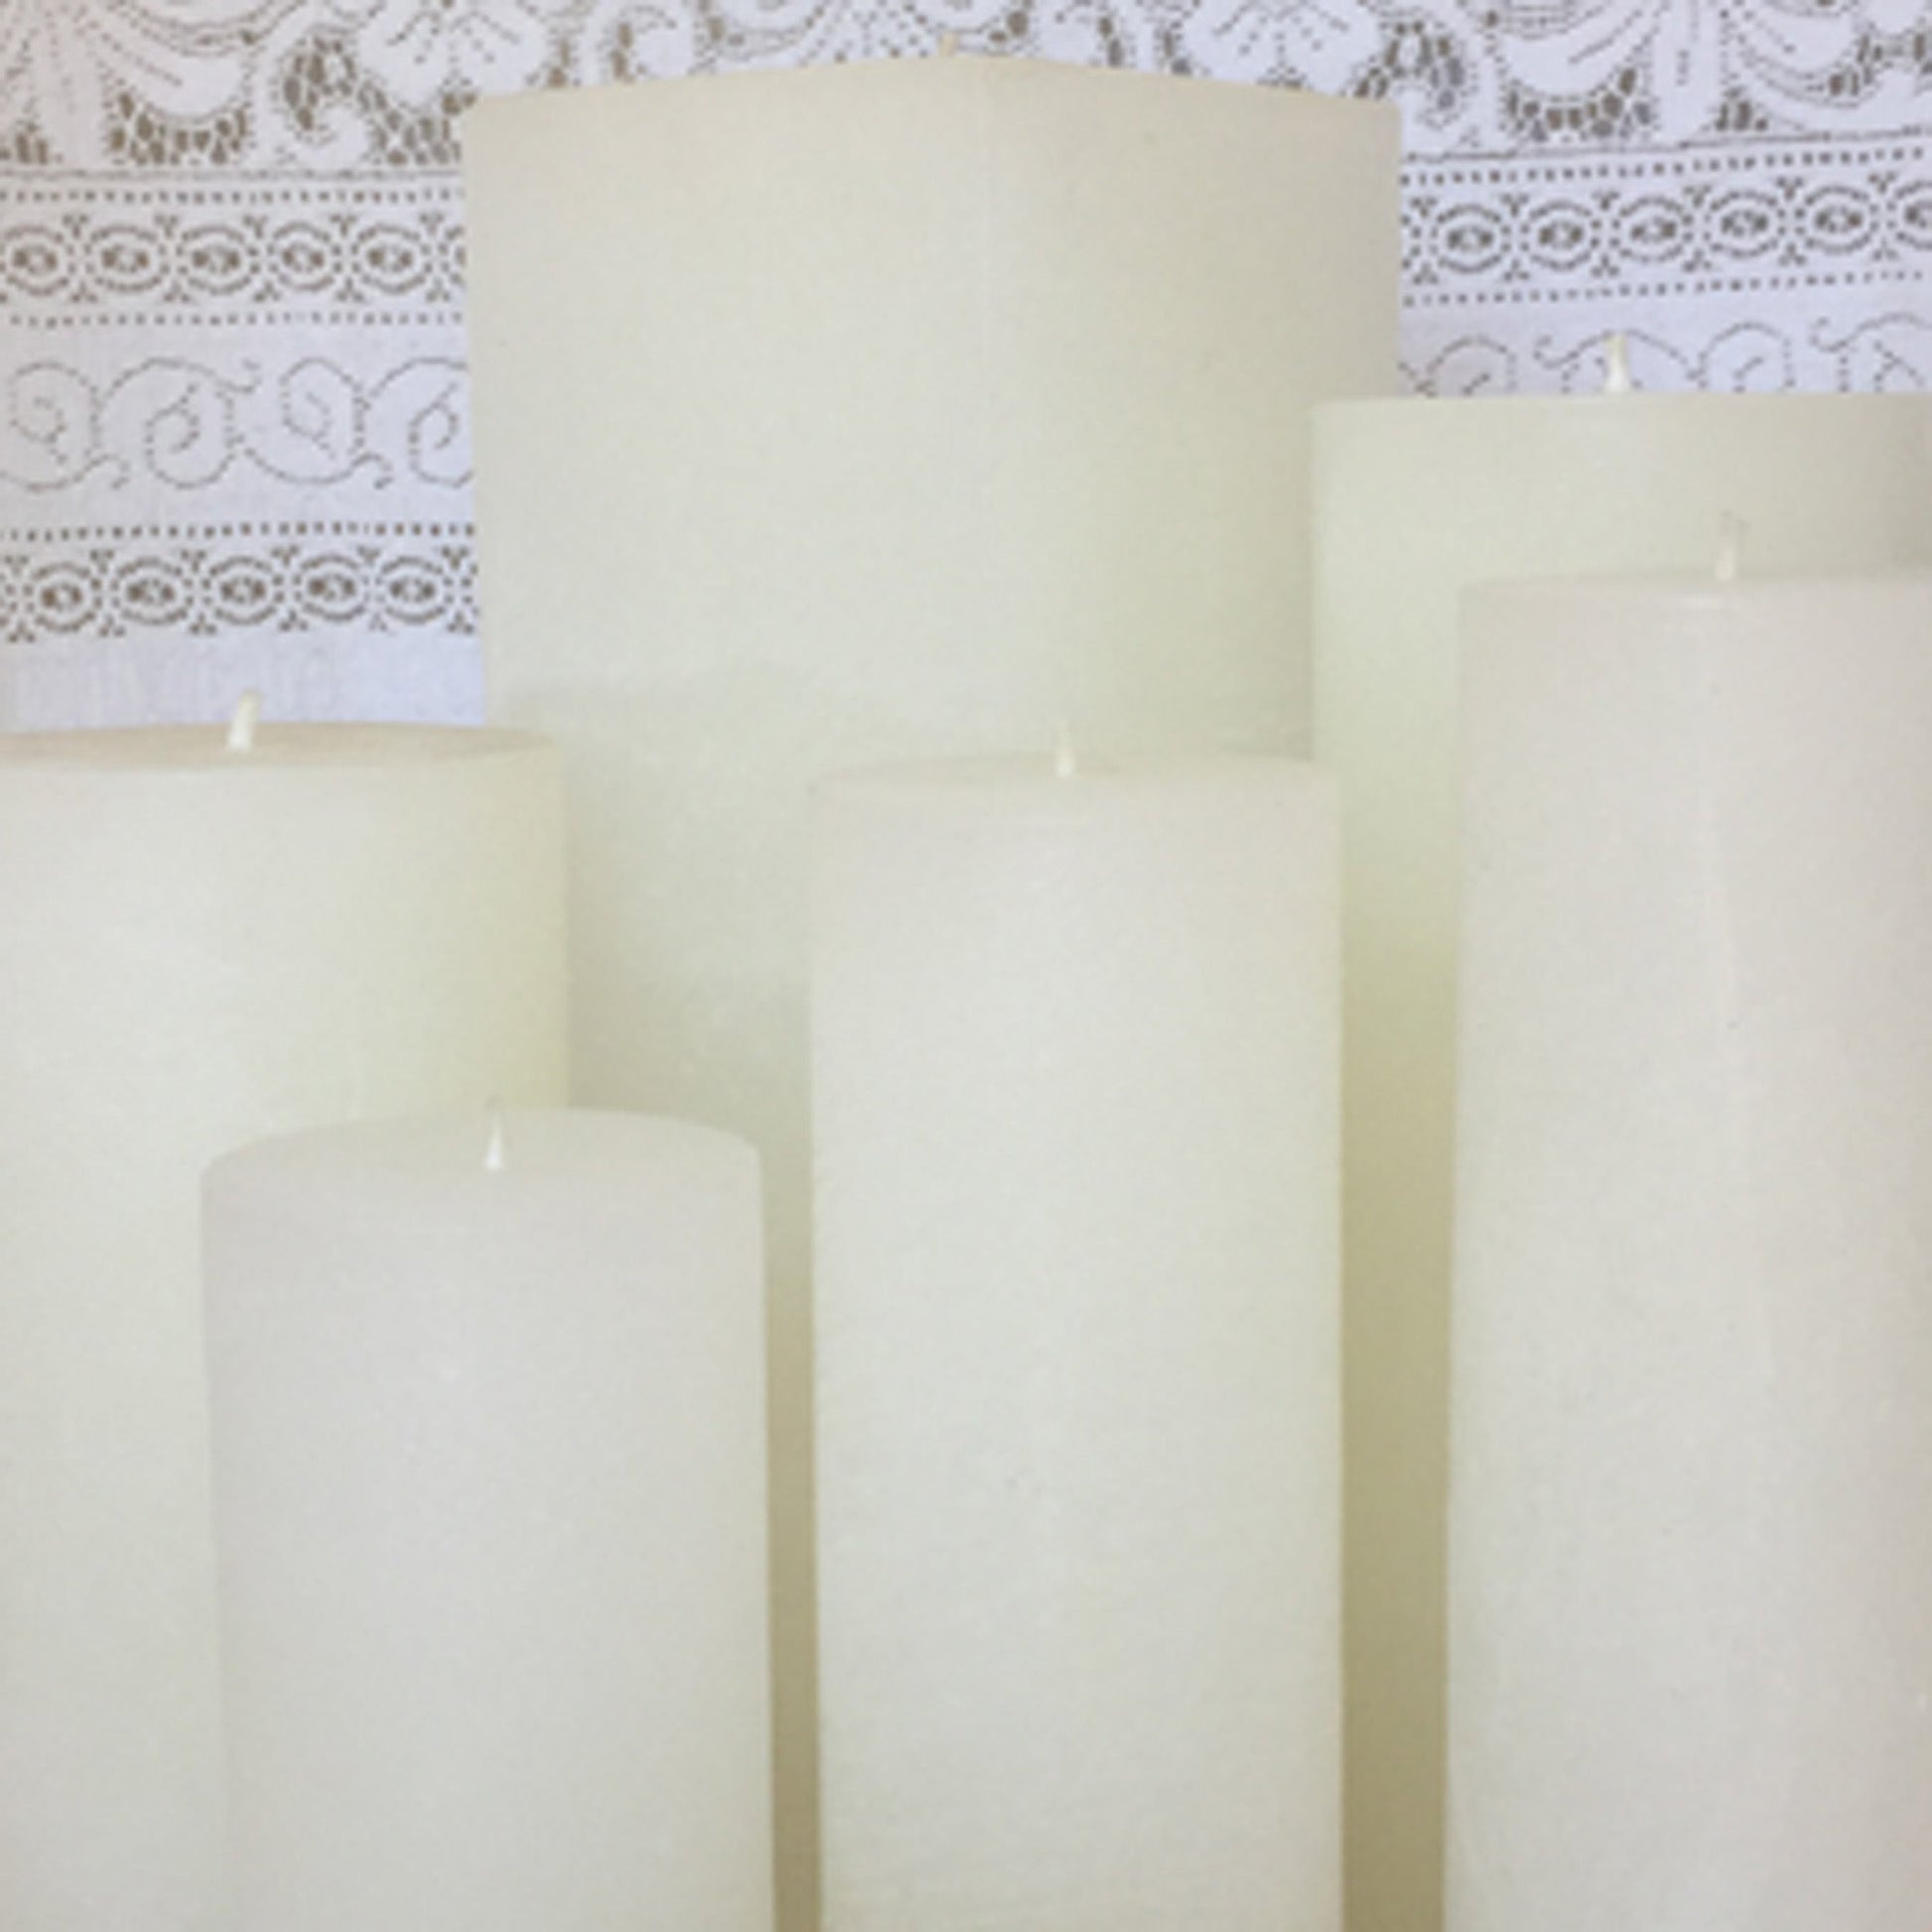 2"D x 6"H or 8"H Round Rustic Pillar candles, 30 plus colours & 6 heights, fragrance free - Fanny Bay Candle Company